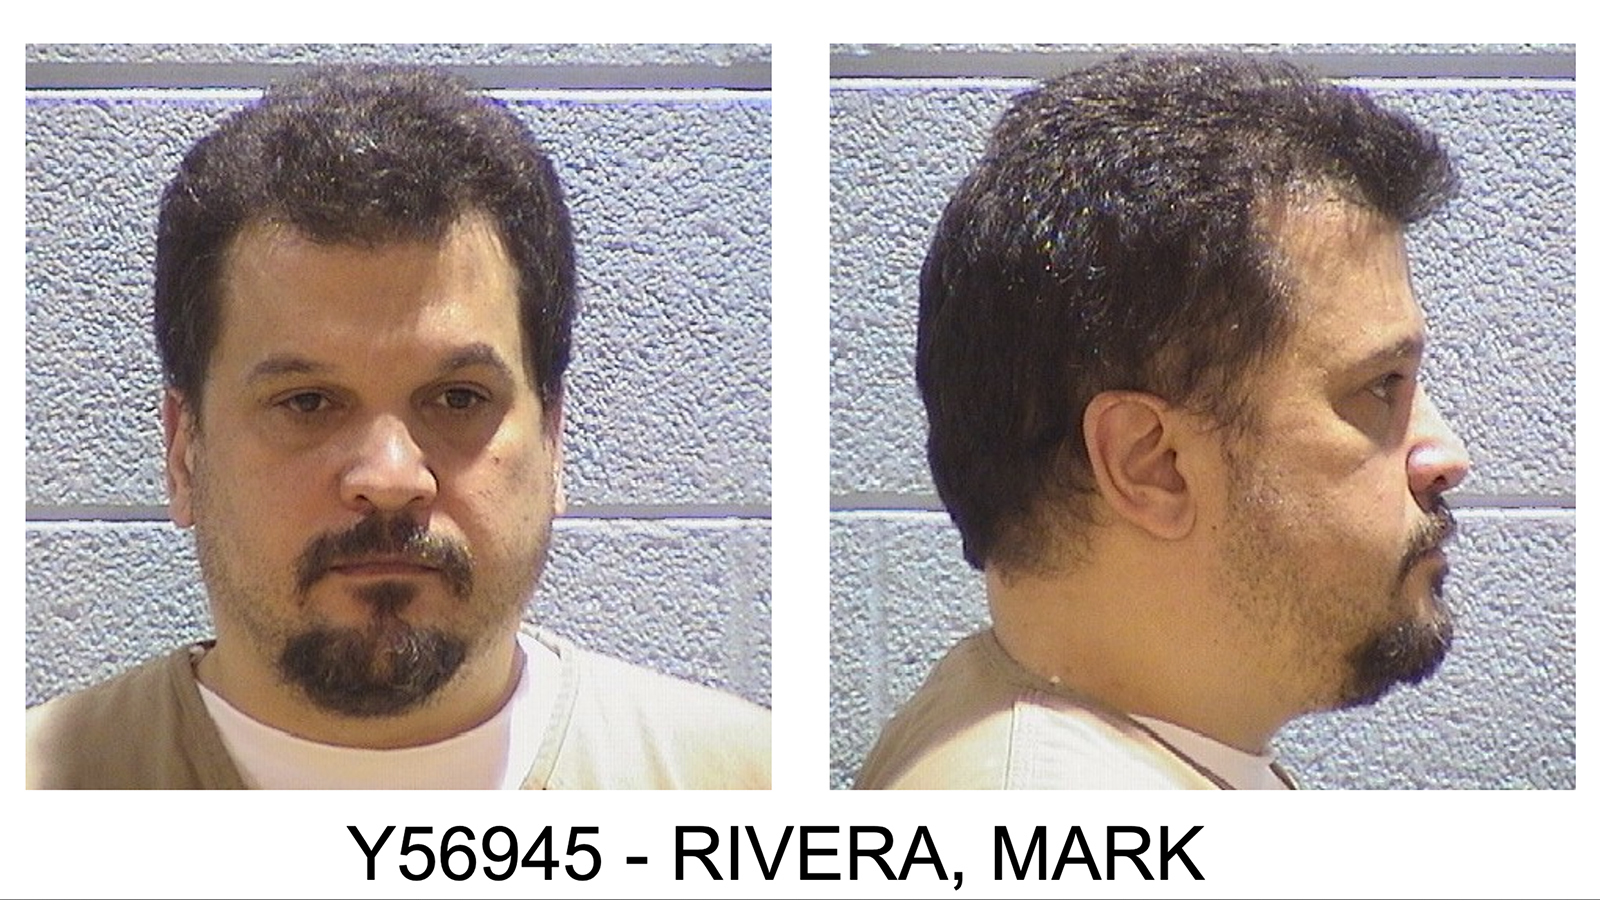 Mark Rivera was admitted to Stateville Correctional Center in Crest Hill, Illinois, on March 24, 2023. Photos via Illinois Department of Corrections